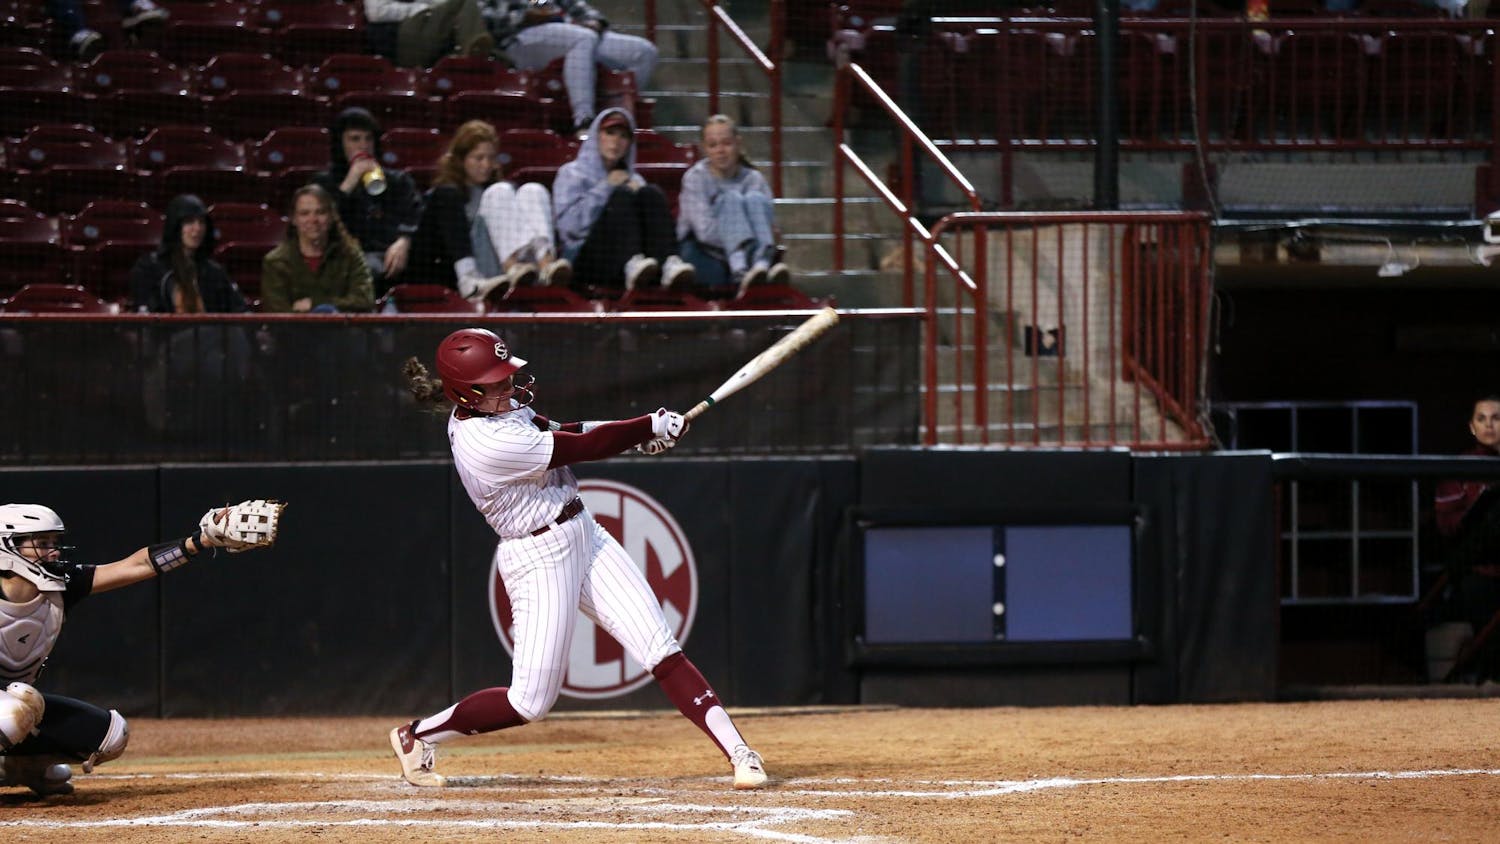 Redshirt senior outfielder Kianna Jones swings at a pitch during South Carolina's matchup against Massachusetts at Beckham Field on Feb. 24, 2024. Jones had one hit for the Gamecocks during its 5-0 victory over the Minutemen.